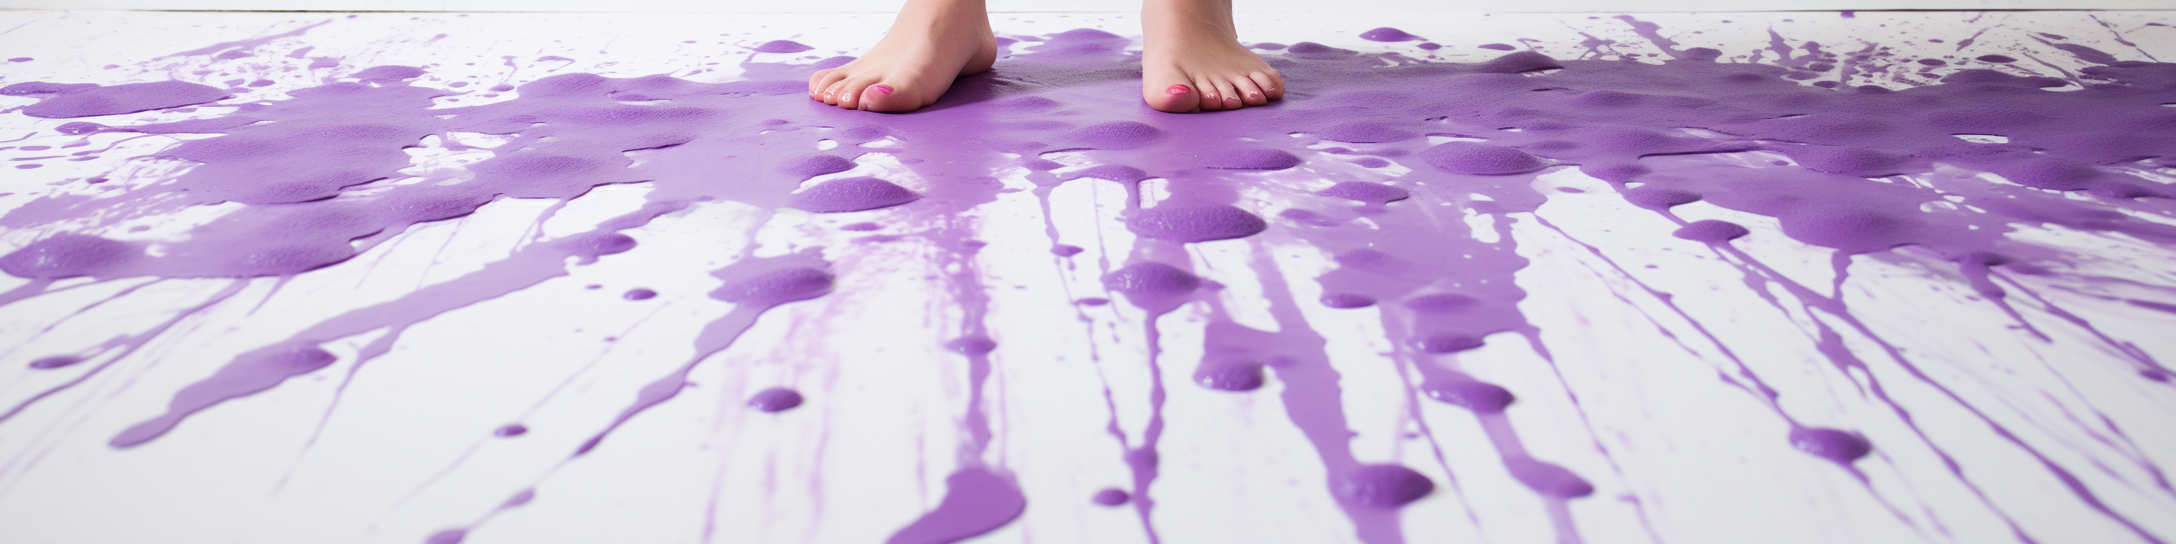 The Challenge of Paint Stains on Carpets